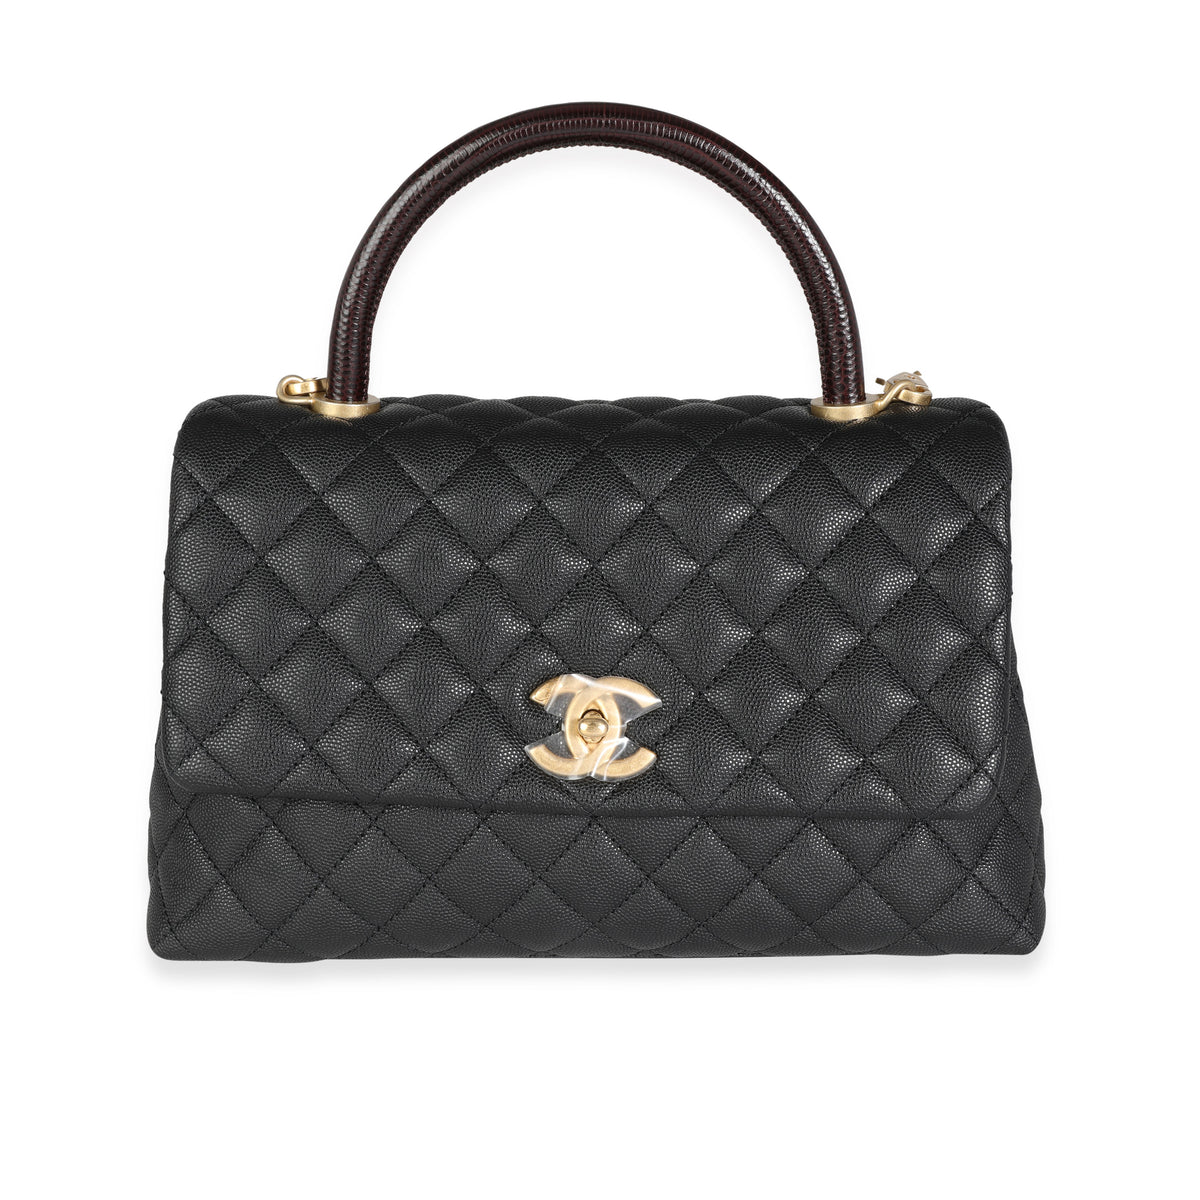 Chanel Black Quilted Caviar & Brown Lizard Embossed Medium Coco